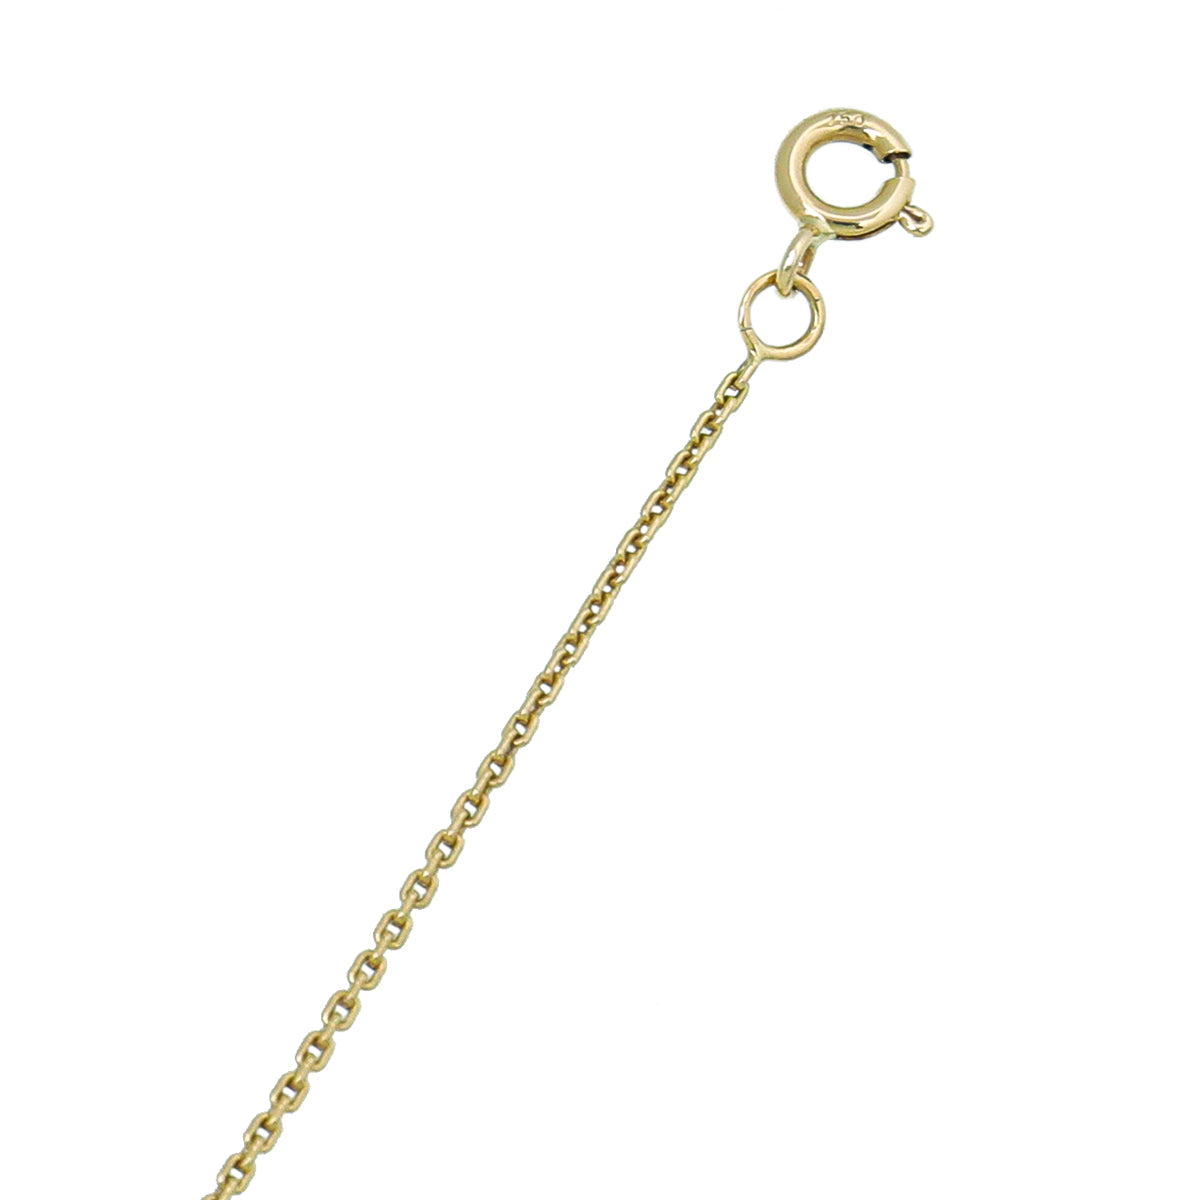 Shop Louis Vuitton Lv volt one small pendant, yellow gold and diamond  (Q93805, Q93805) by lifeisfun